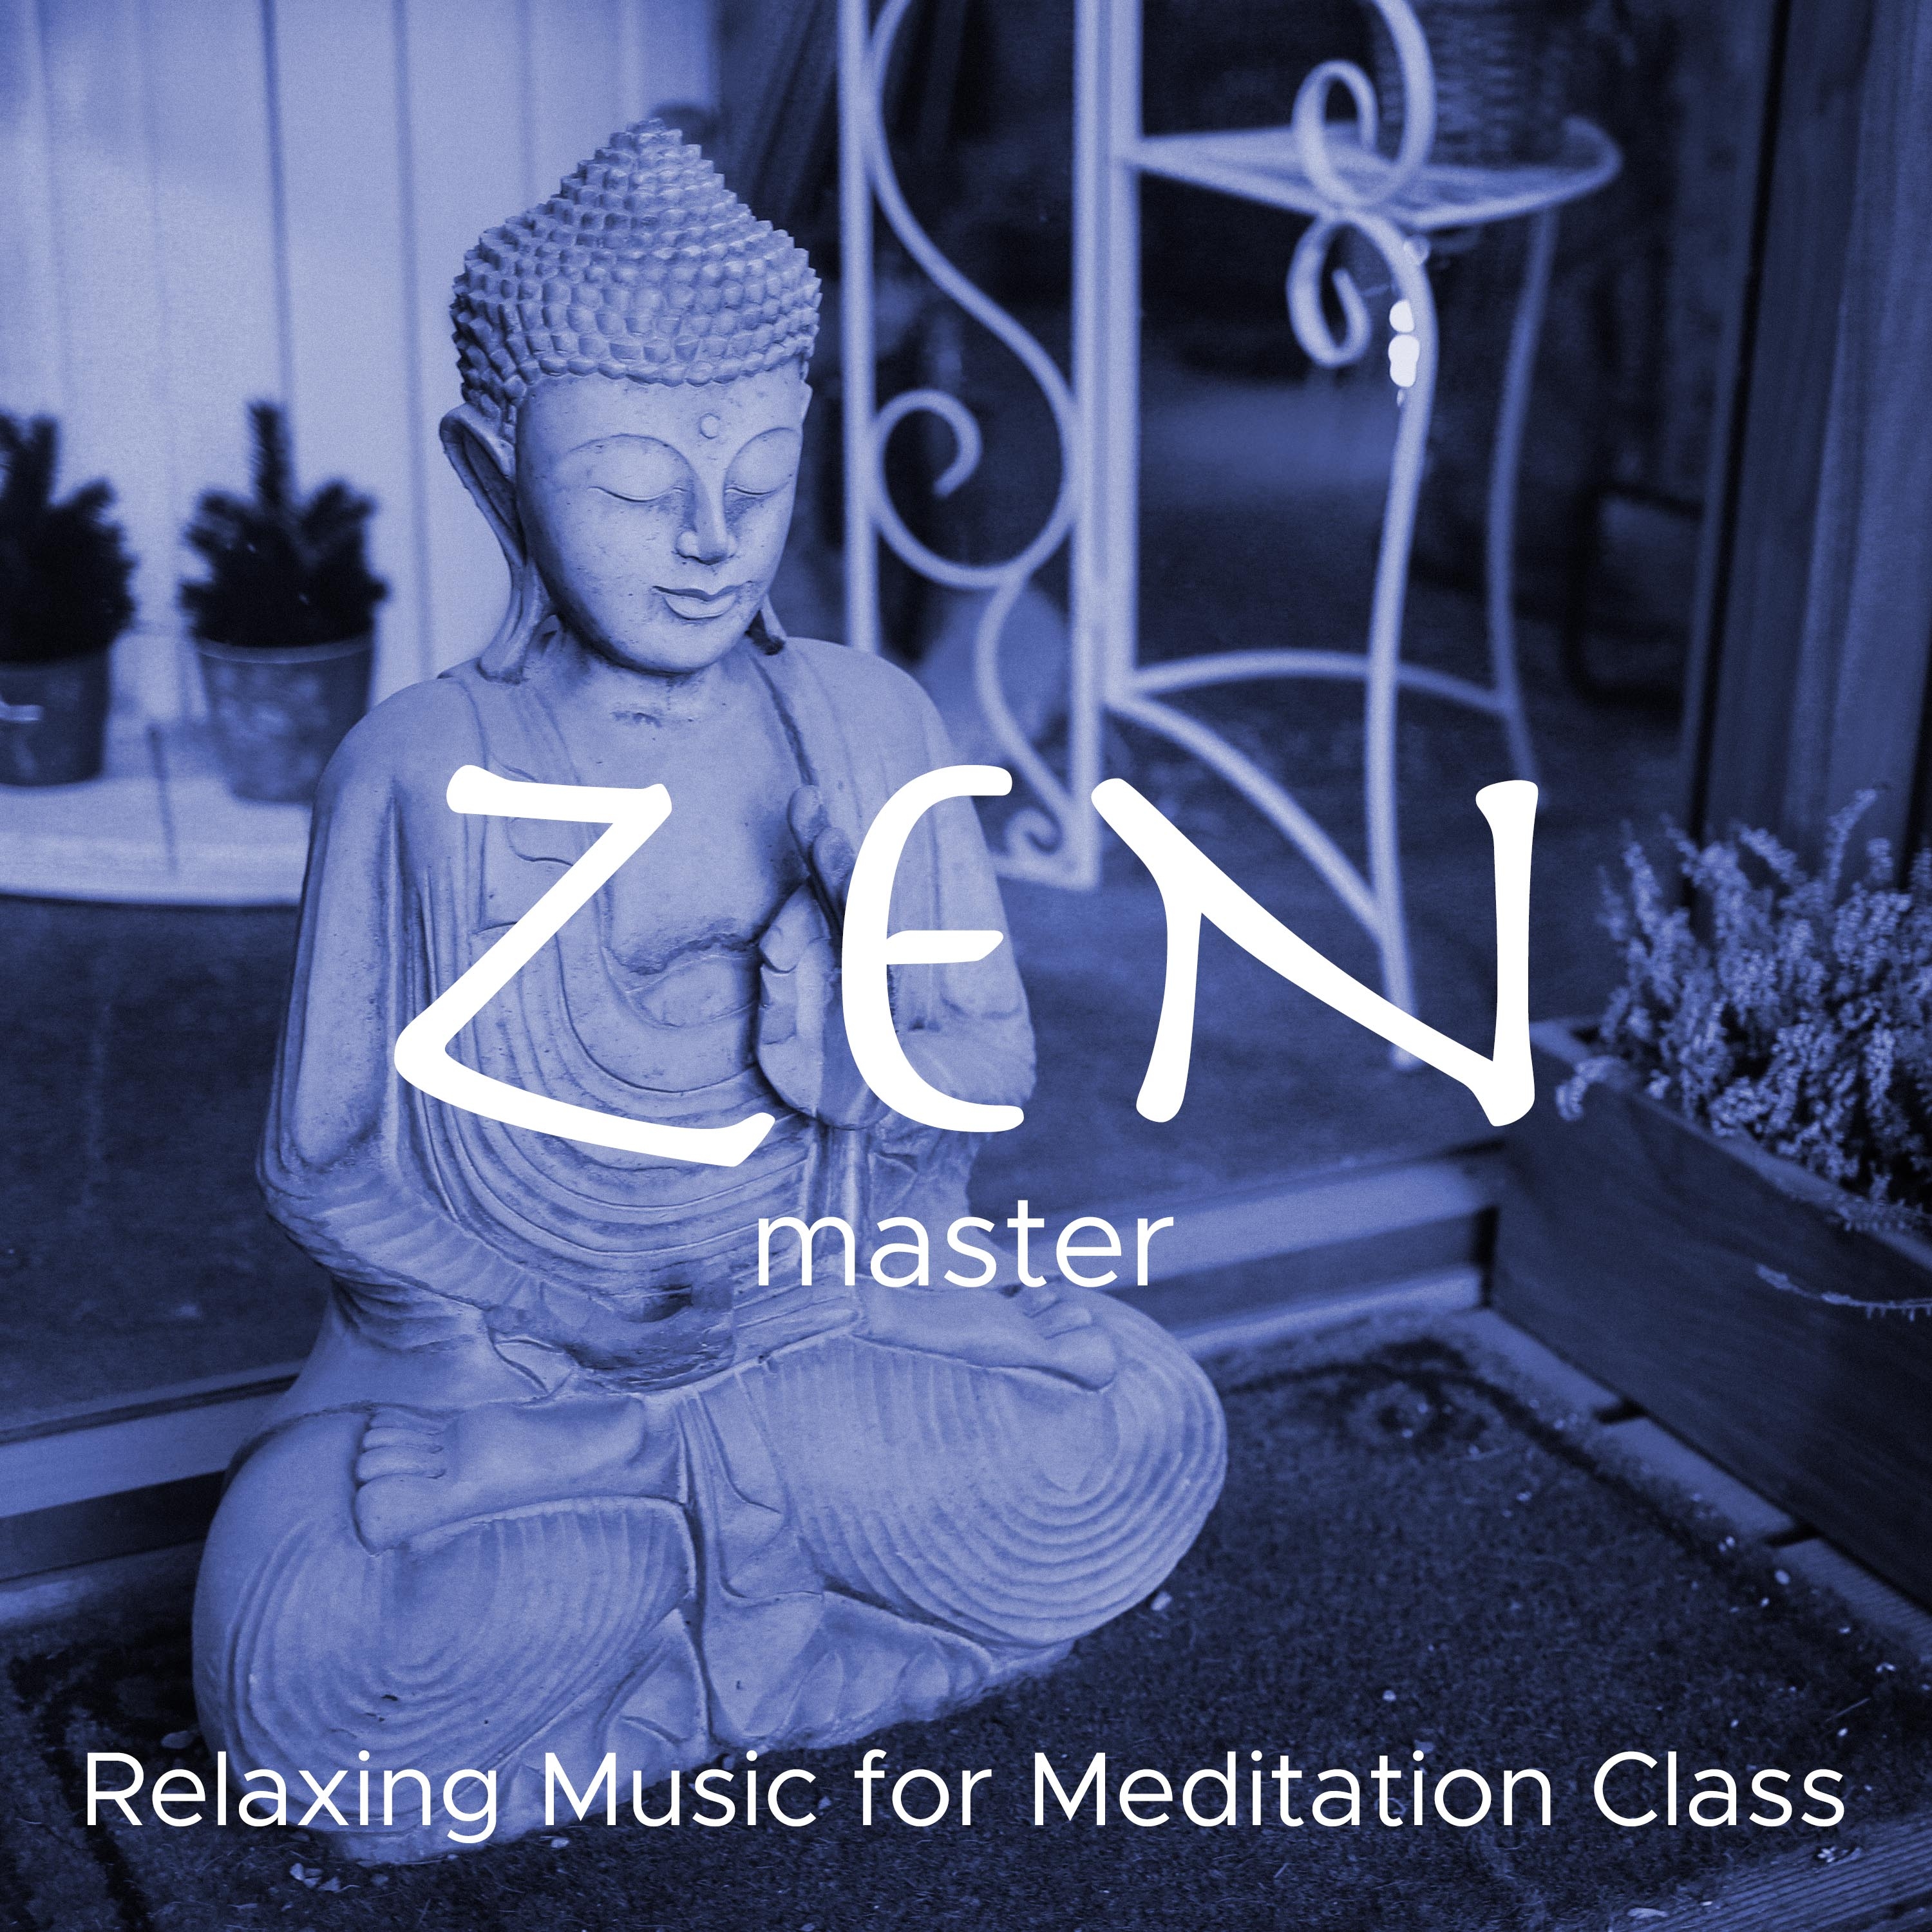 Zen Master - Relaxing Music for Meditation Class, Deep Relaxation, Inner Peace, Tranquility